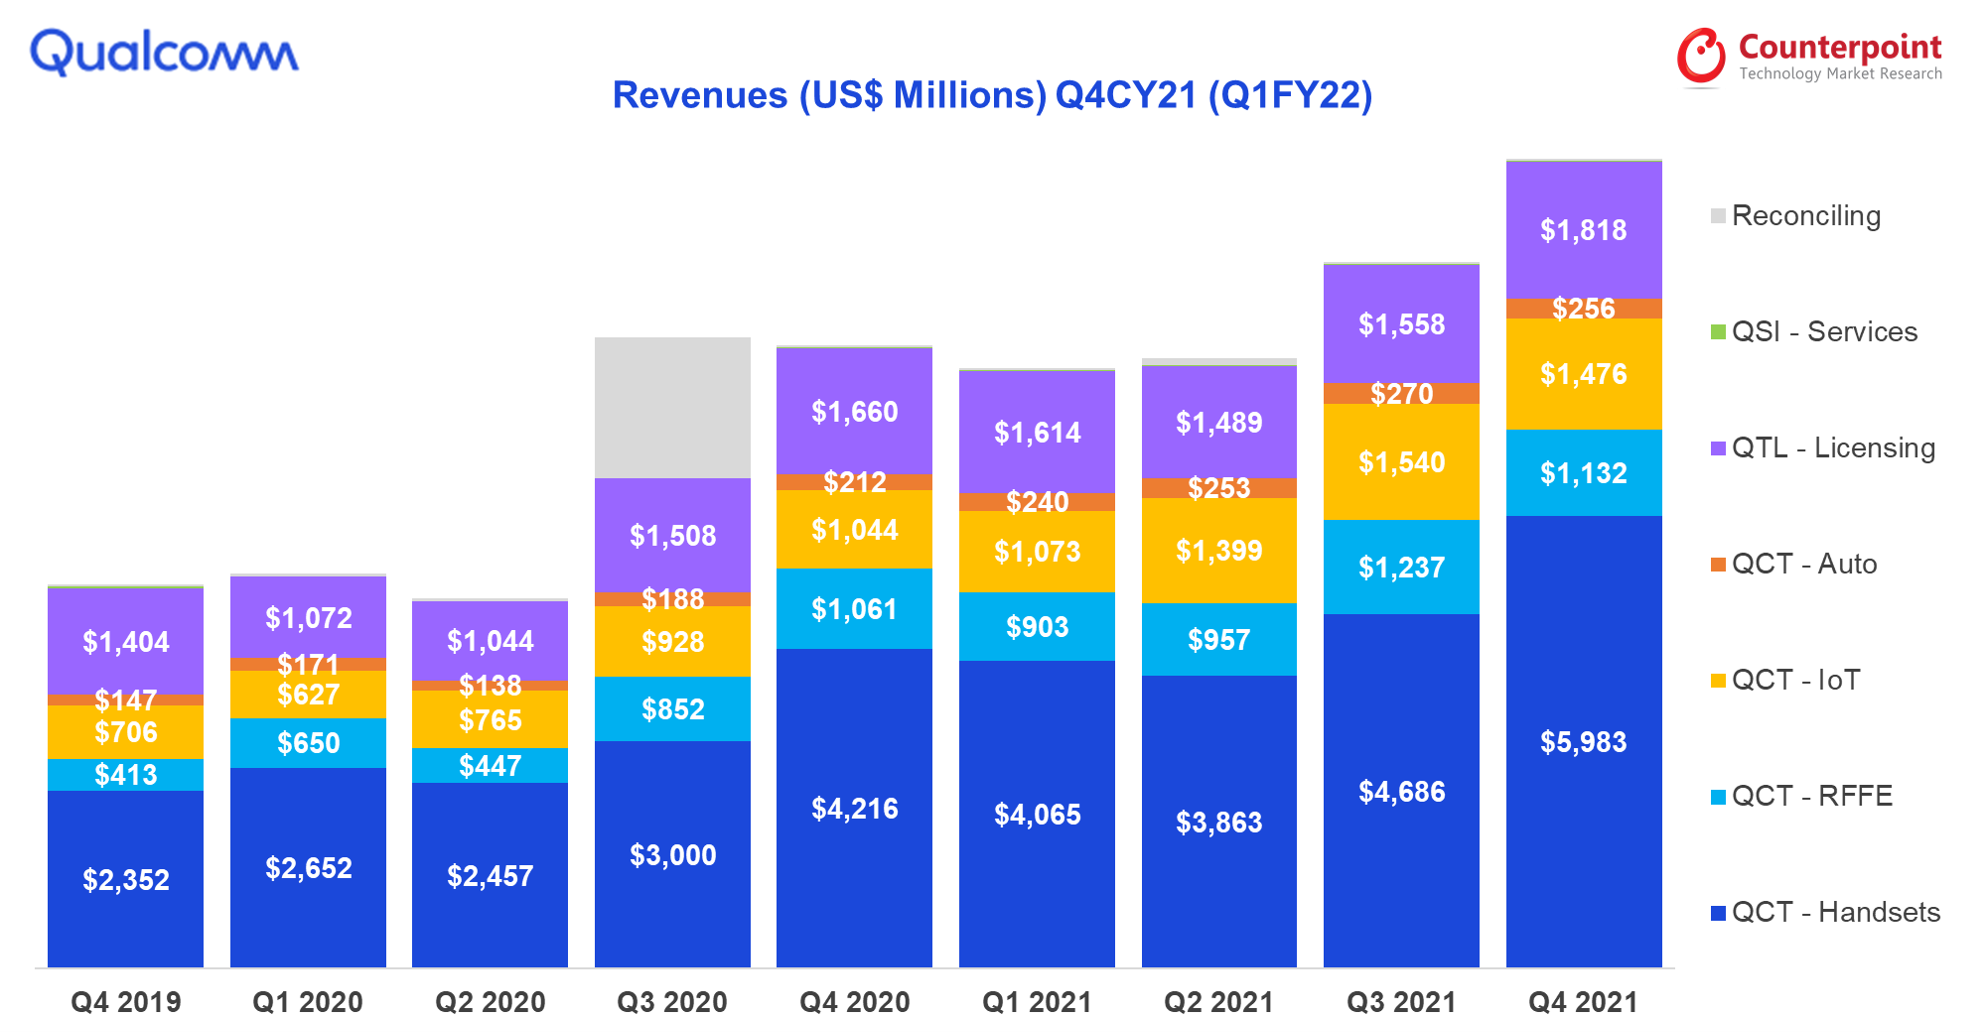 Counterpoint Research - Q4 2021 (FY Q1 2022) - Qualcomm Segment Revenues Performance Analysis.png